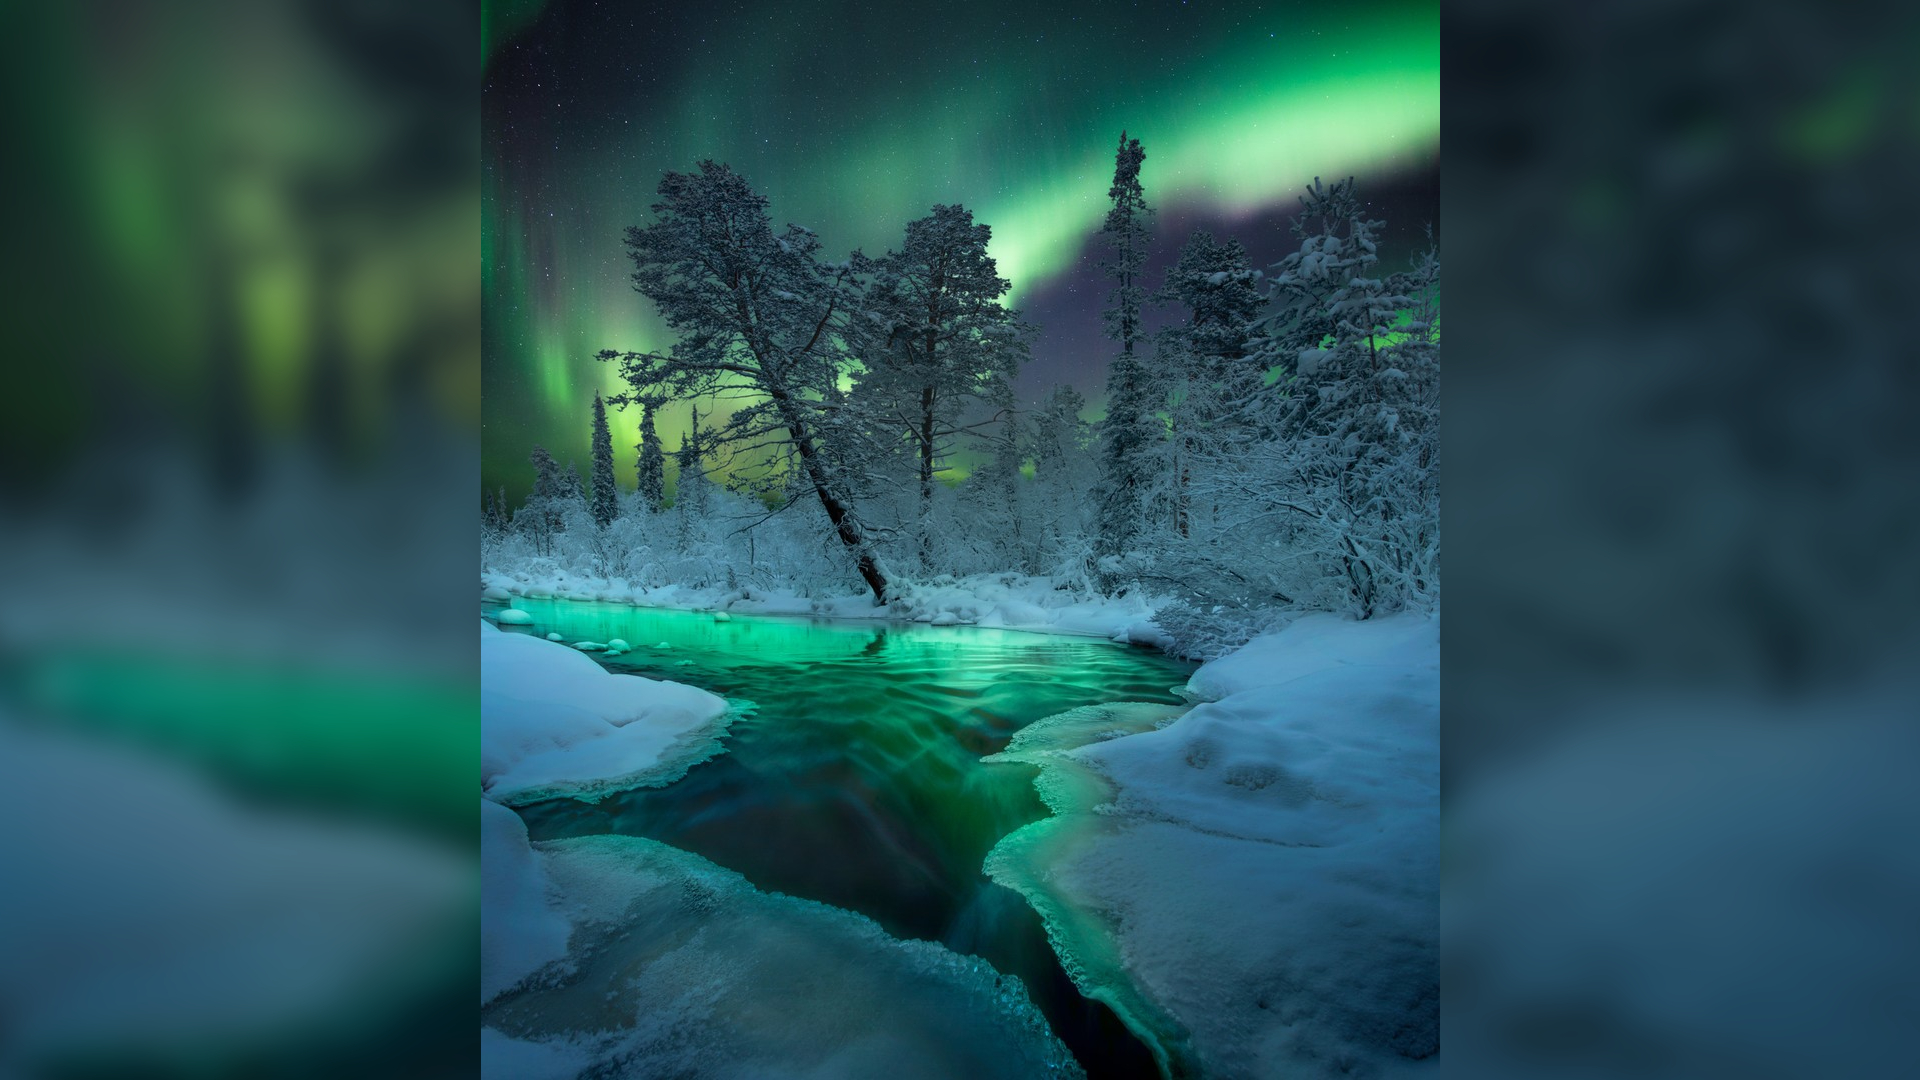 A photo of the northern lights, part of the travel photography blog Capture the Atlas 2022 Northern Lights Photographer of the Year collection. This image was taken by Aleksei & Anastasia R.